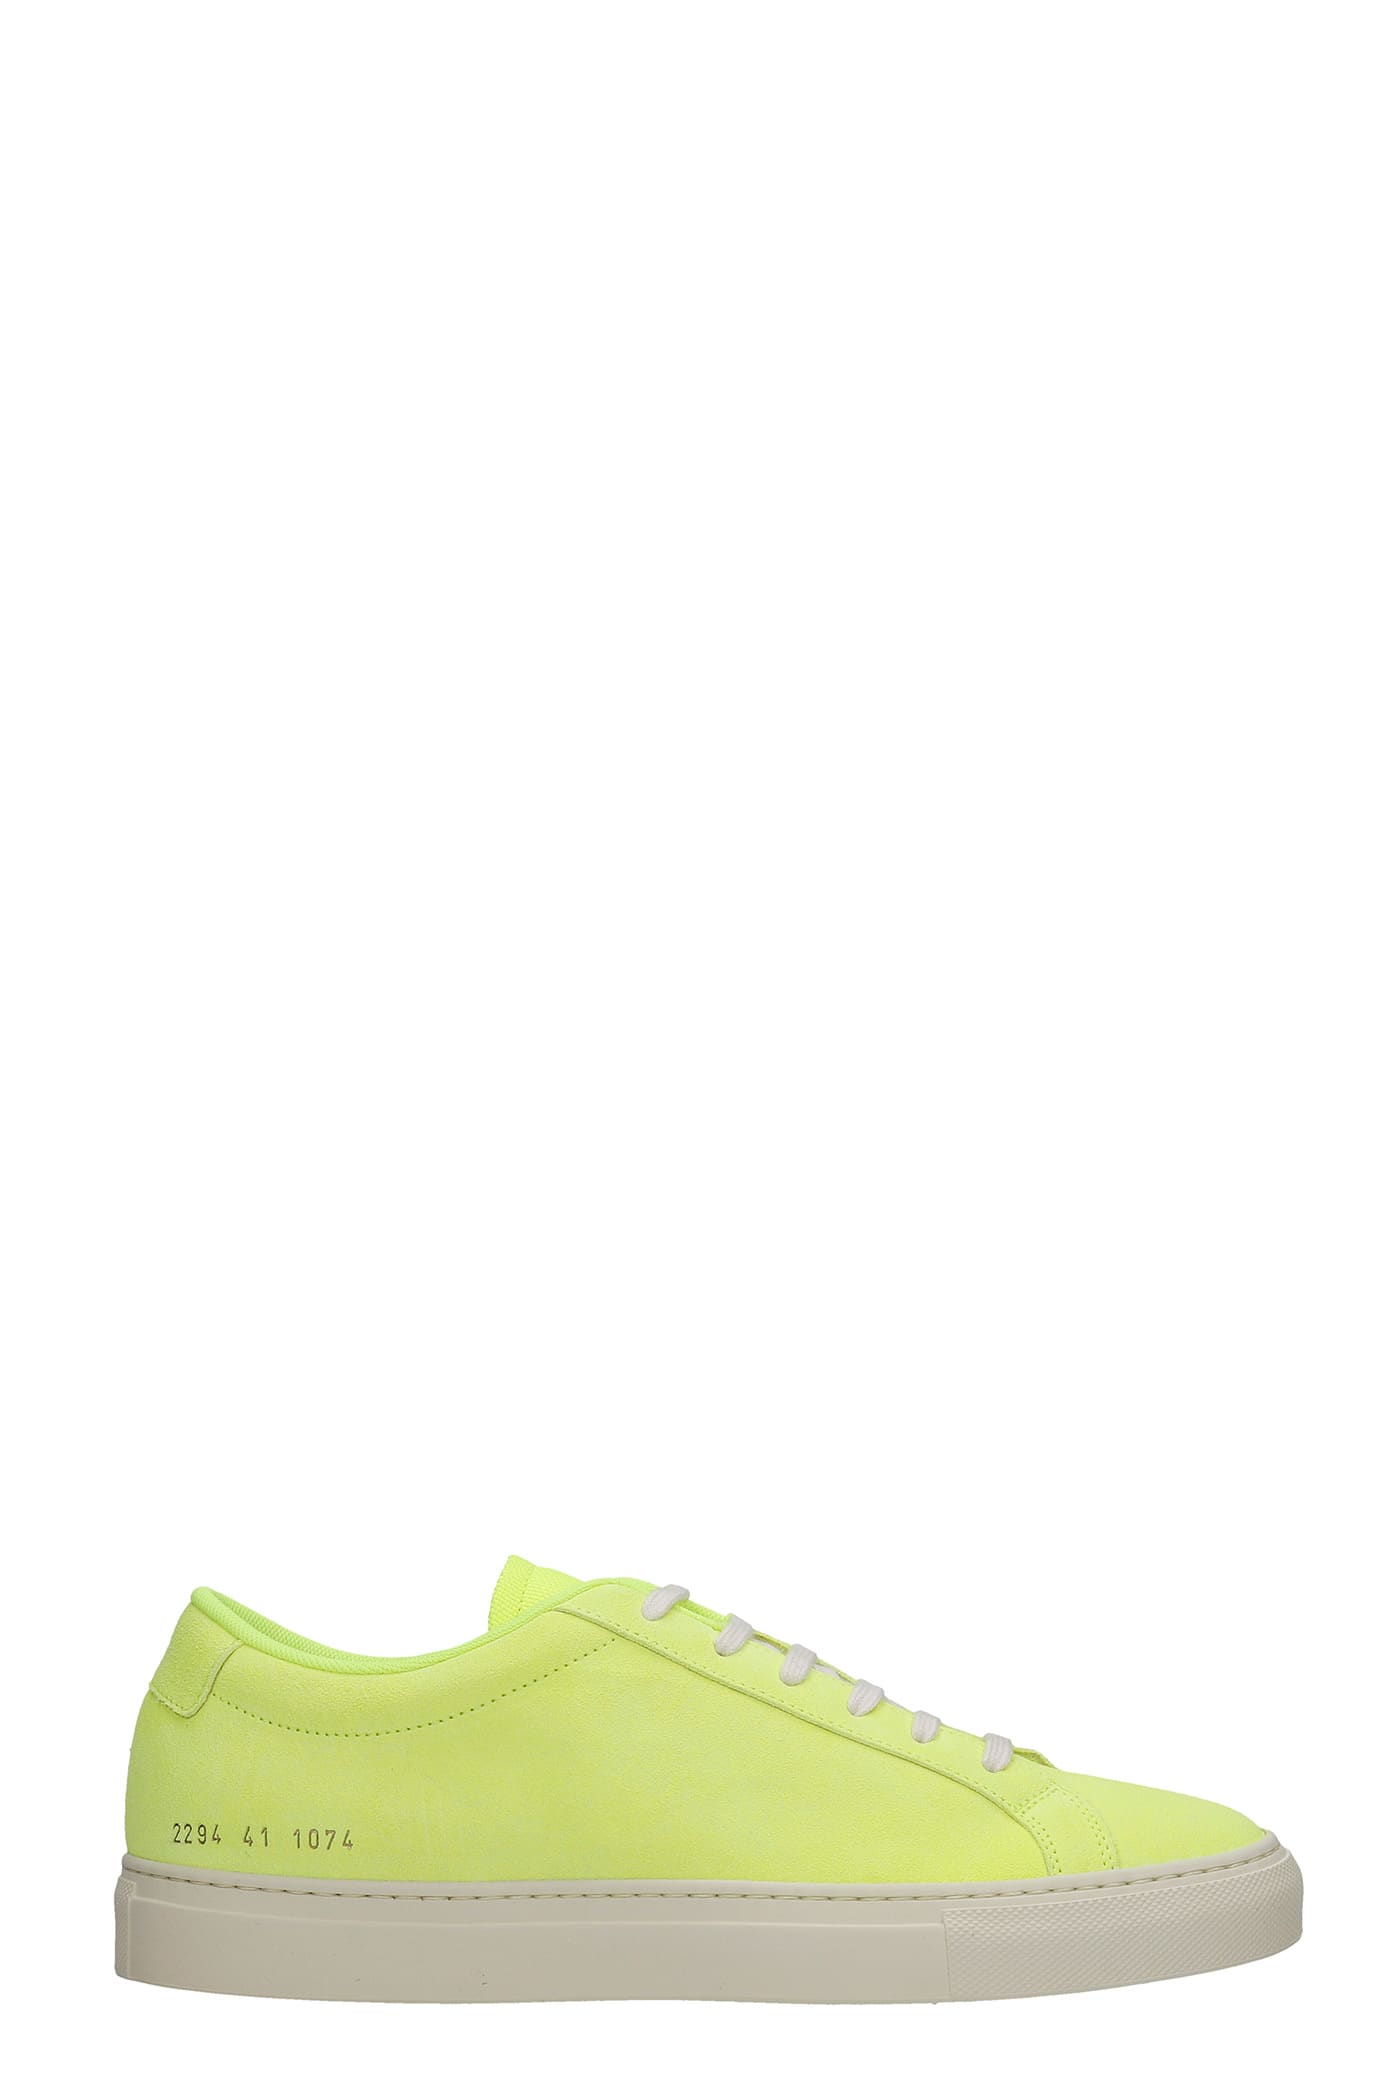 COMMON PROJECTS ACHILLE FLUO SNEAKERS IN YELLOW SUEDE,22941074